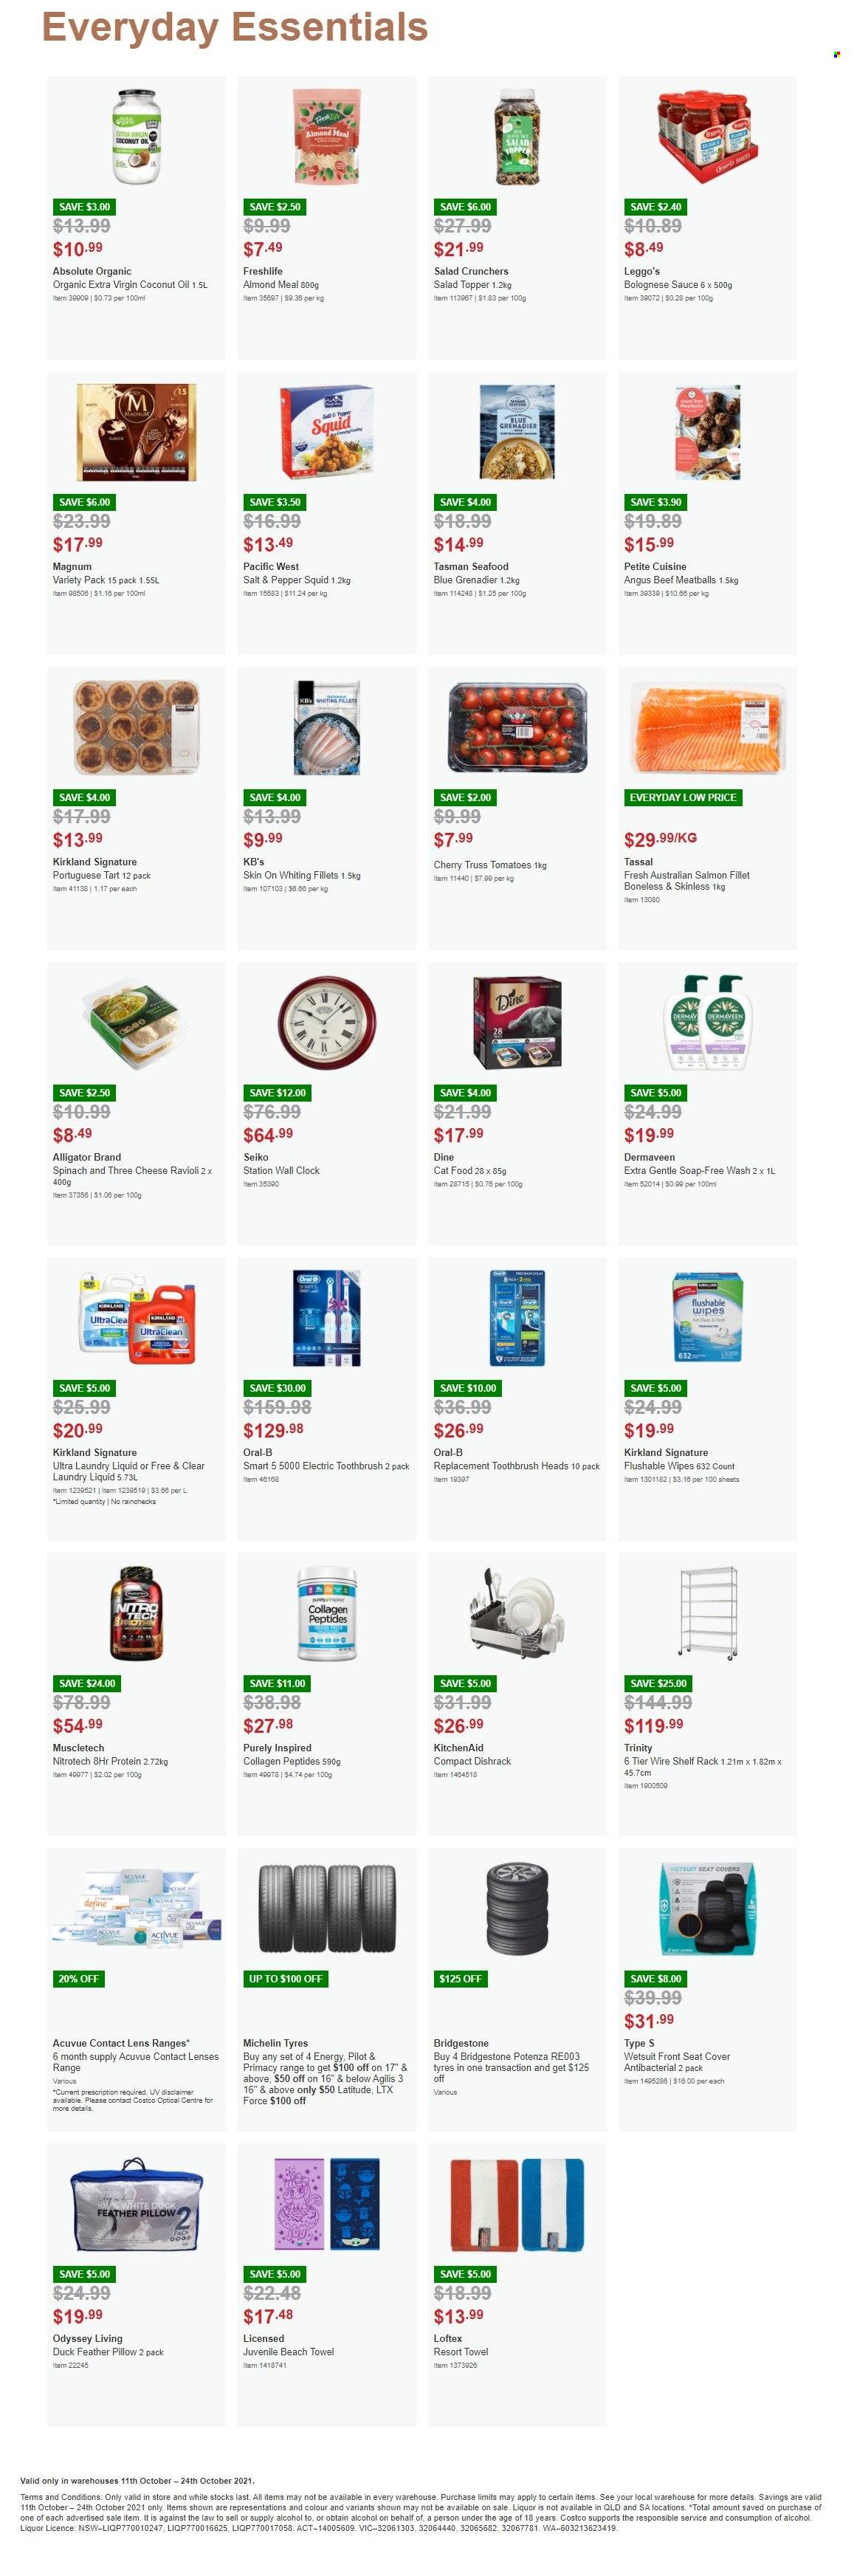 thumbnail - Costco Catalogue - 11 Oct 2021 - 24 Oct 2021 - Sales products - sauce, bolognese sauce, liquor, wipes, laundry detergent, soap, toothbrush, Oral-B, coconut oil, Absolute, clock, KitchenAid, Pilot, topper, pillow, towel, beach towel, animal food, cat food, lens, lenses, electric toothbrush, Seiko, car seat cover, Bridgestone, Michelin, tires, contact lenses. Page 2.